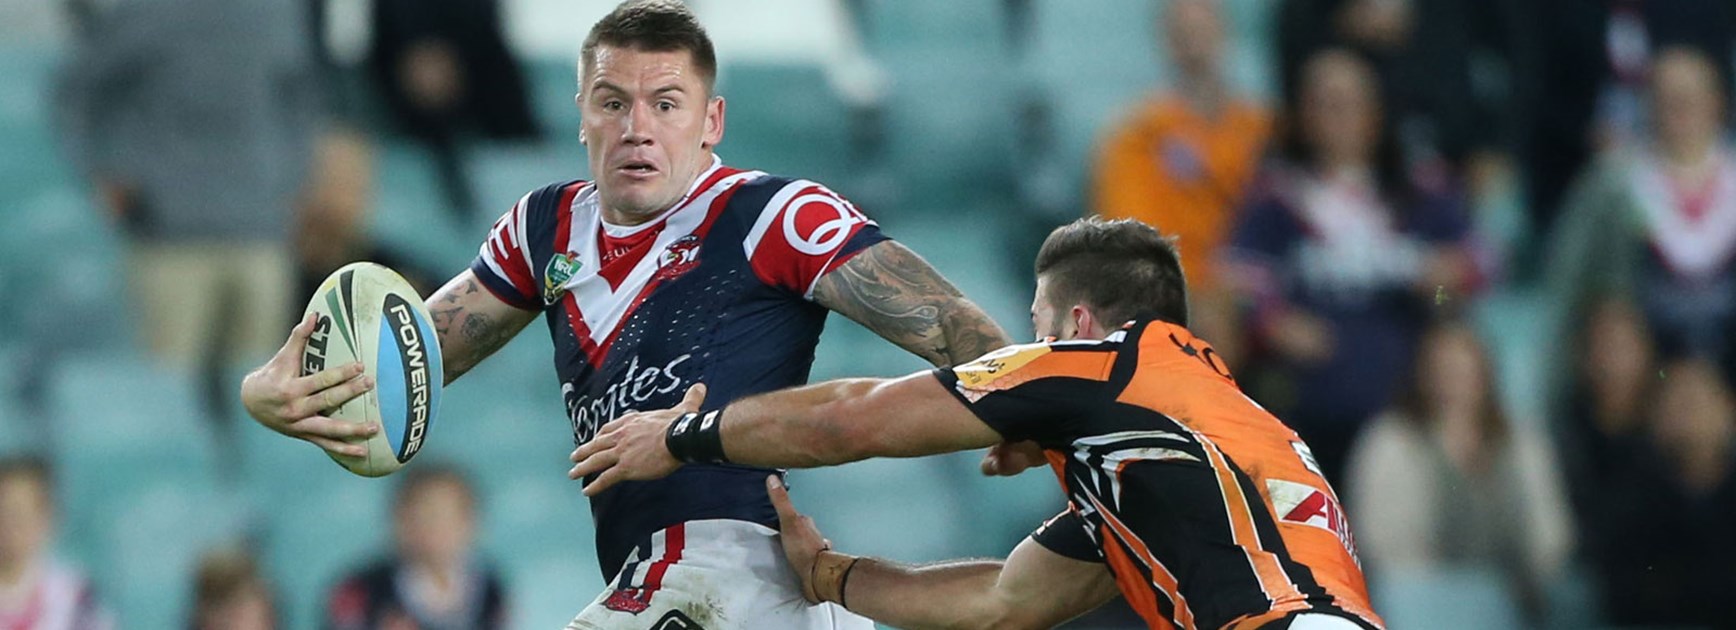 Shaun Kenny-Dowall moved to the wing in the Roosters' Round 9 win over Wests Tigers.